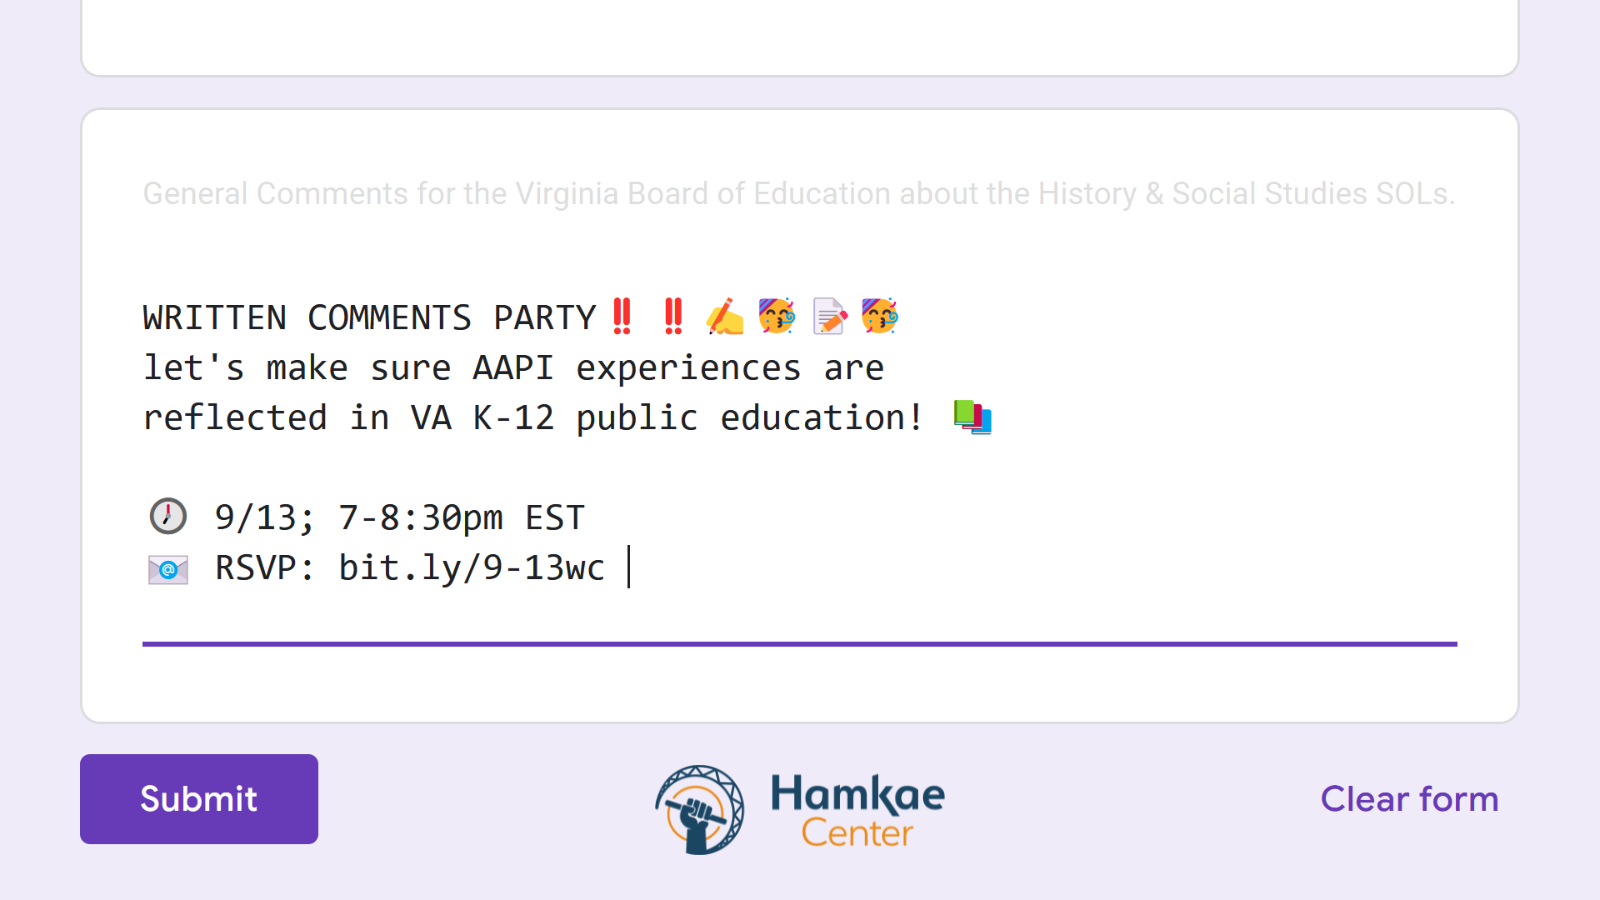 WRITTEN COMMENTS PARTY!! Let's make sure AAPI experiences are reflected in VA K-12 public education! 9/13; 7-8:30pm EST. RSVP: bit.ly/9-13wc. Hosted by Hamkae Center